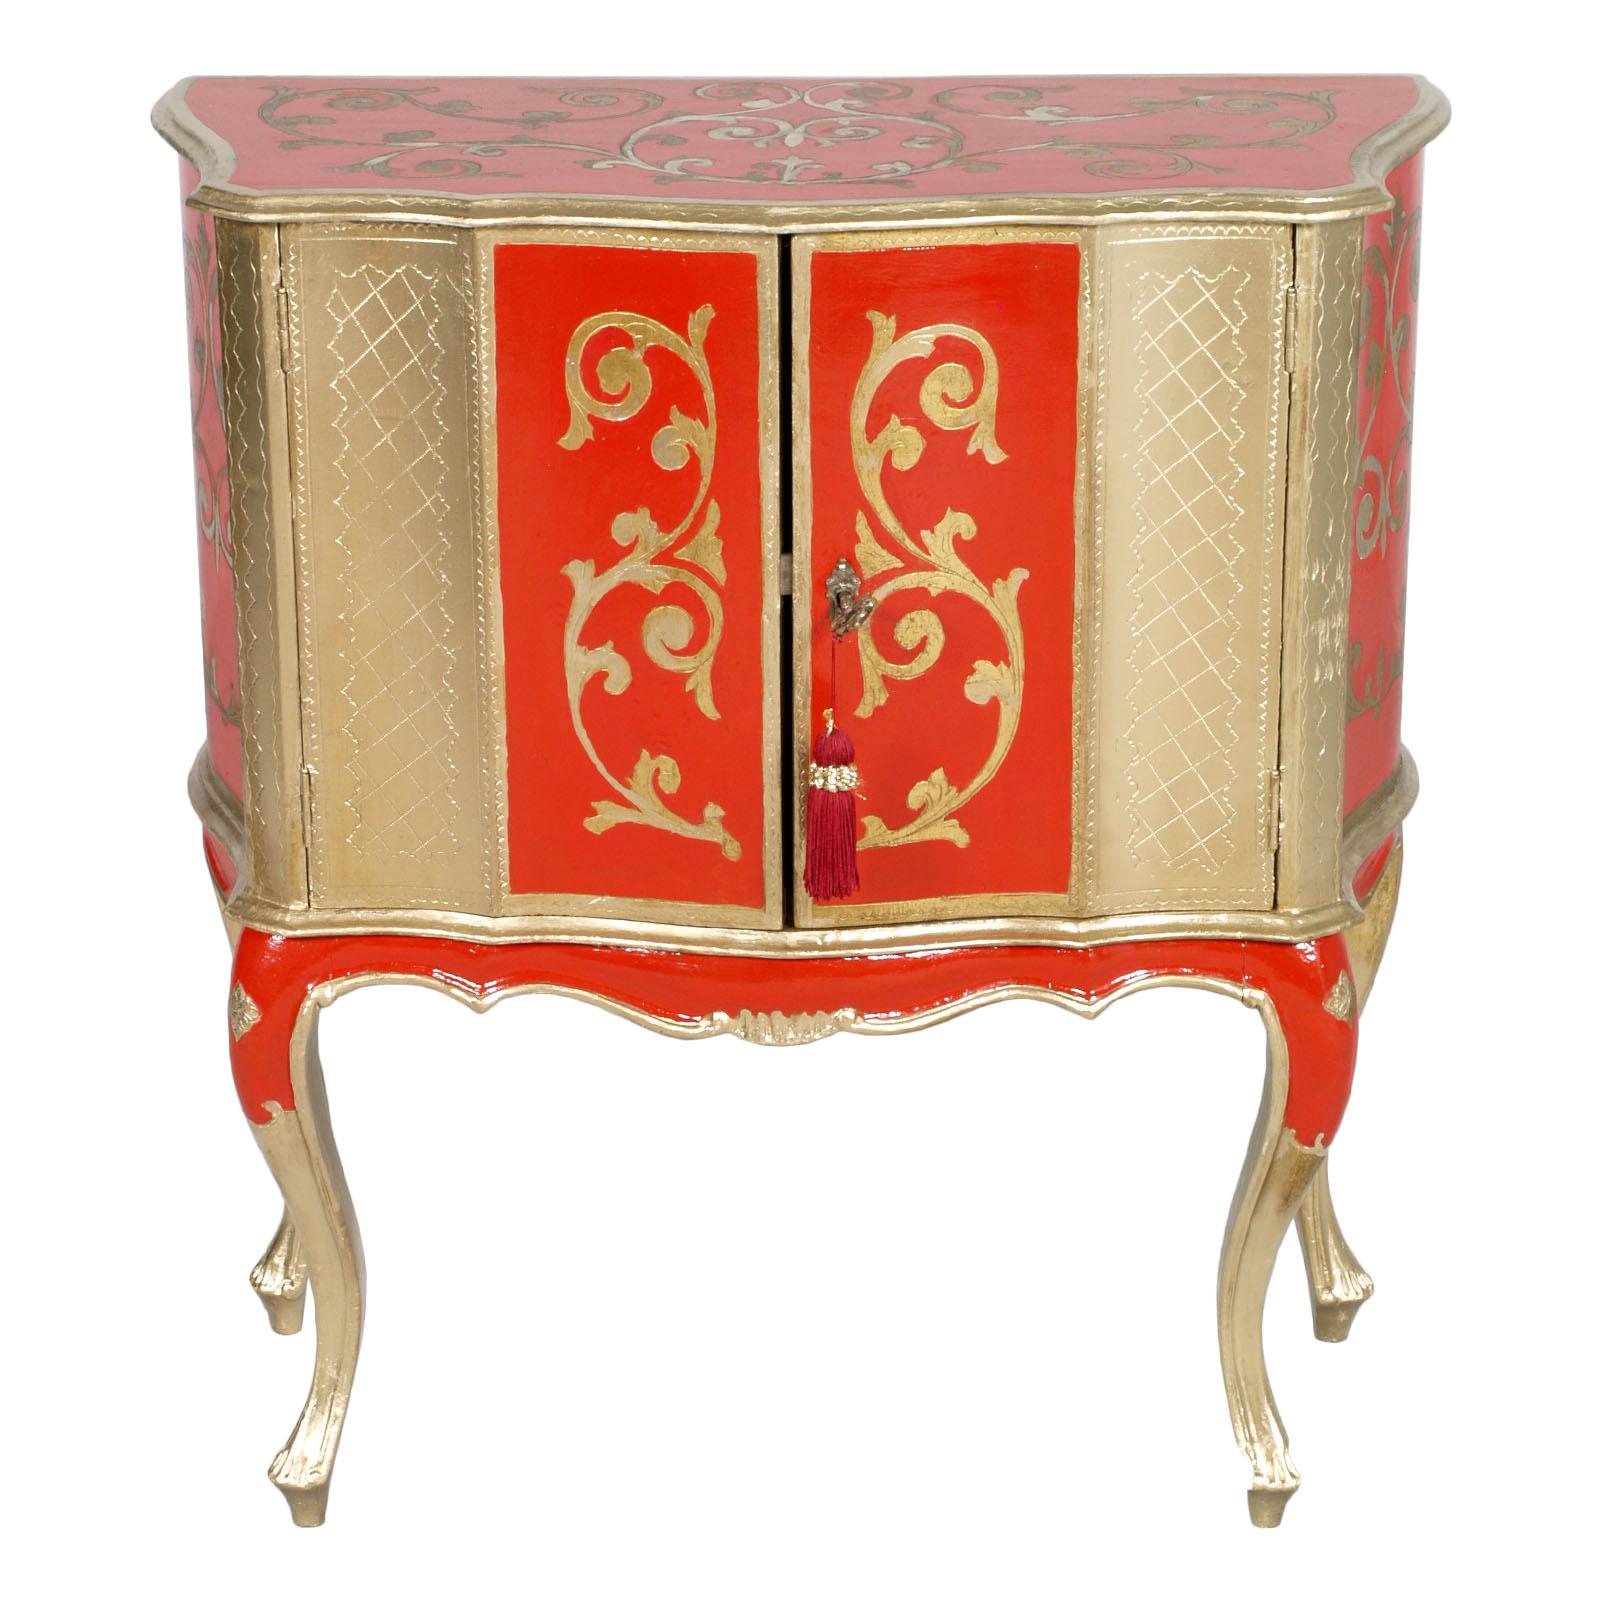 Early 1900s Small Sideboard from Florence, Gold Leaf and Florentine Red Lacquer